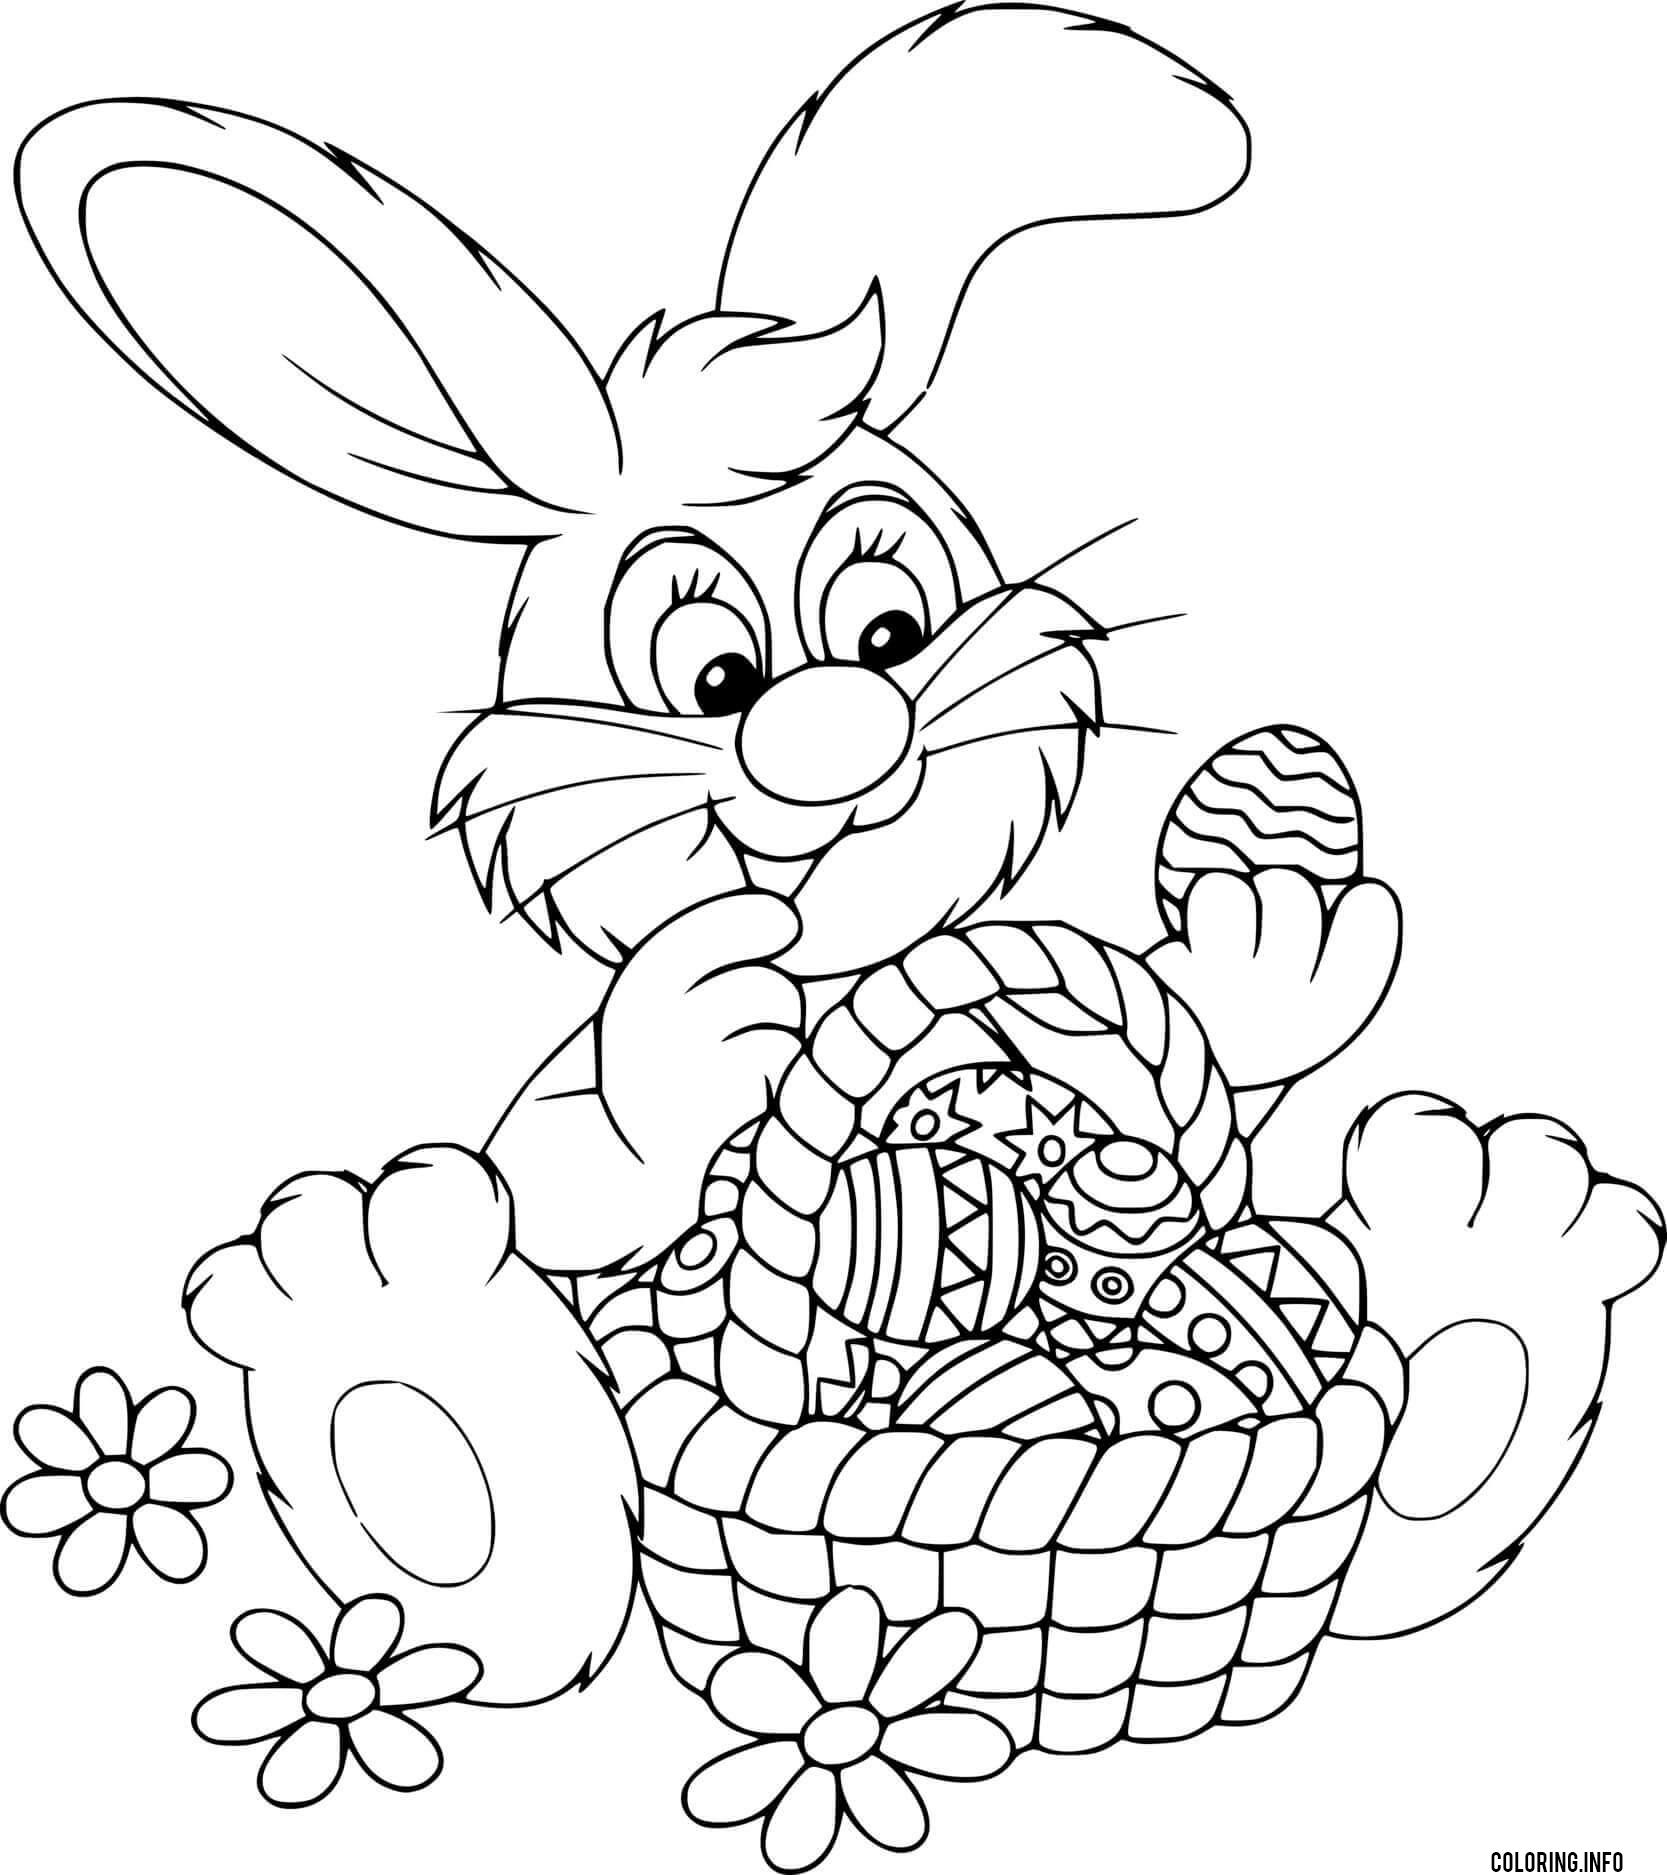 Easter Bunny Taking Out Eggs From The Basket Coloring page Printable